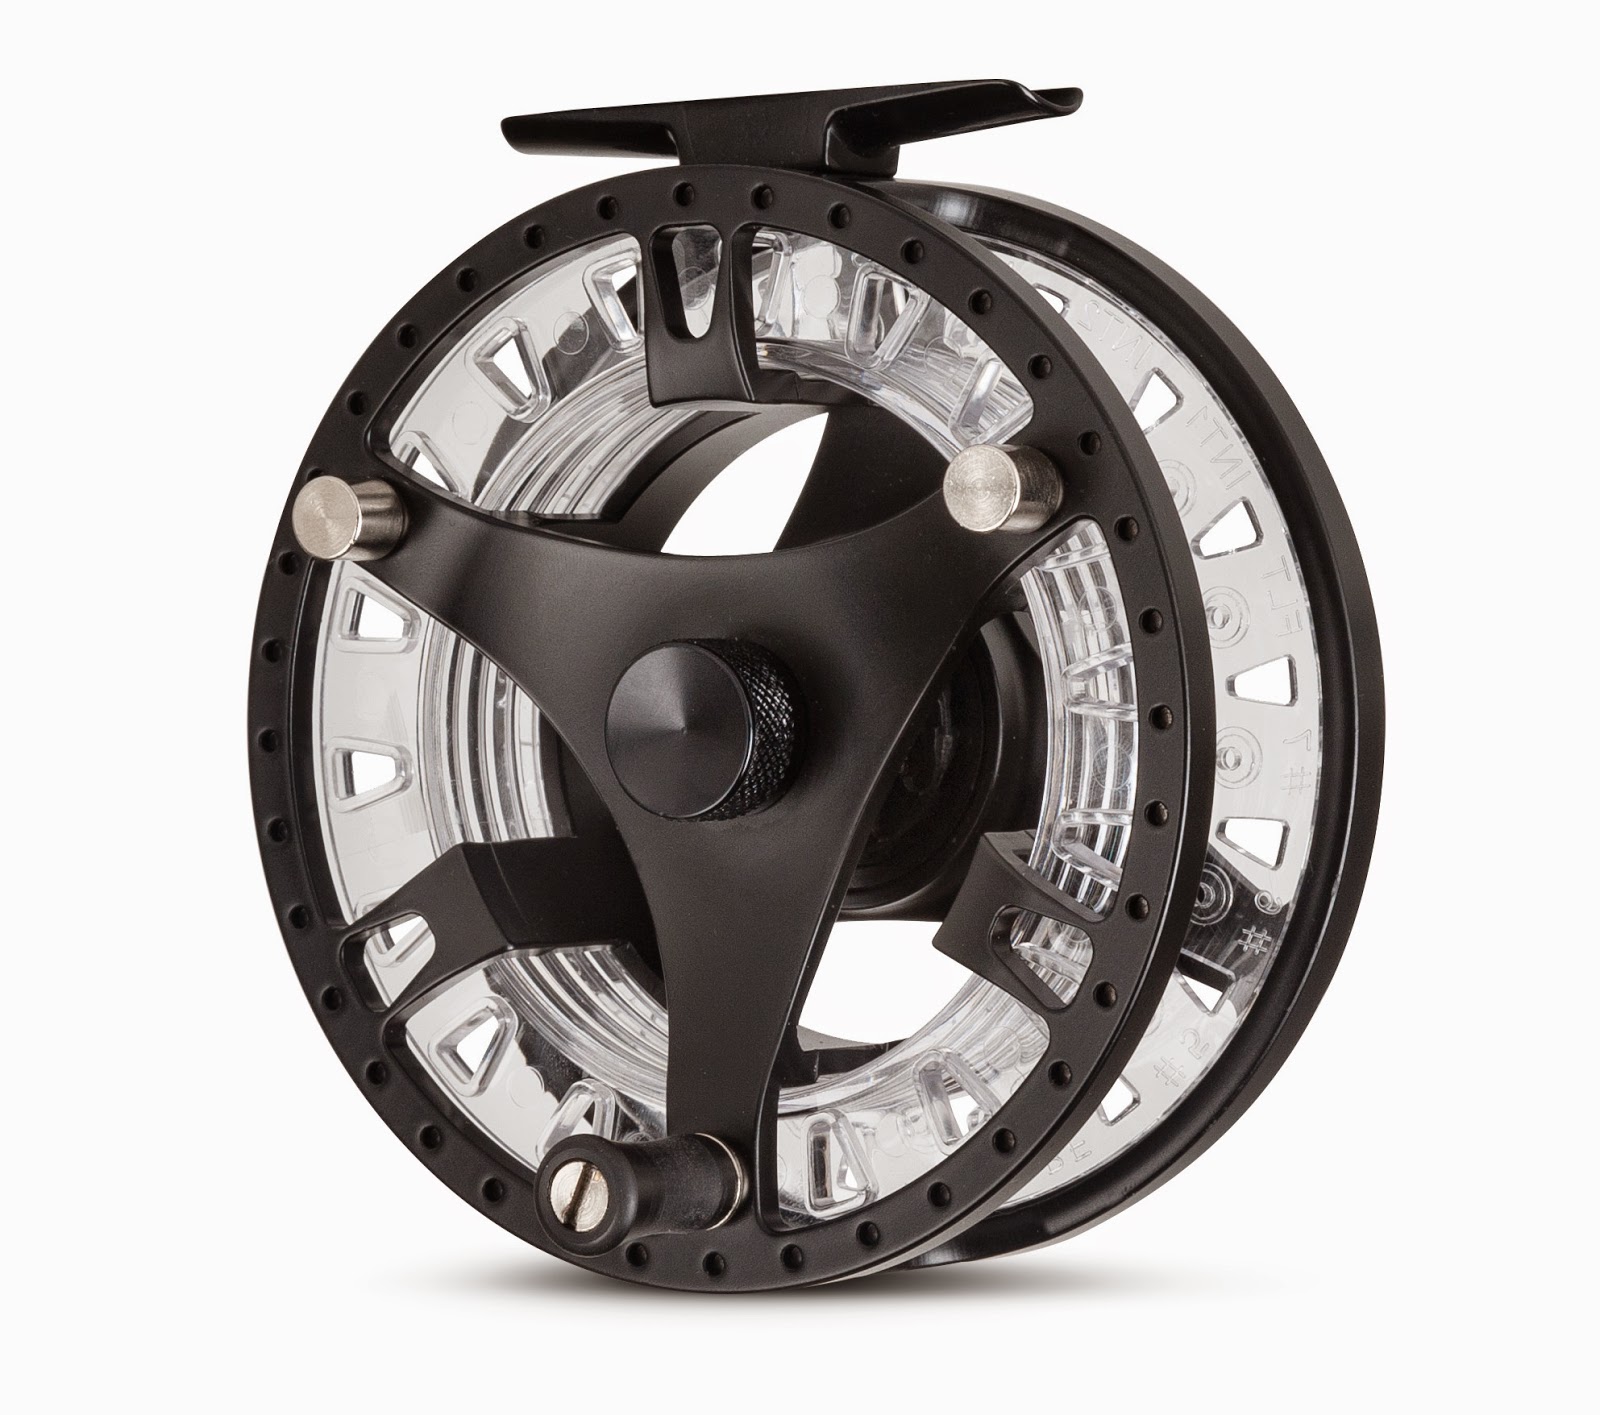 First Look - The New Greys GTS700 Fly Reel